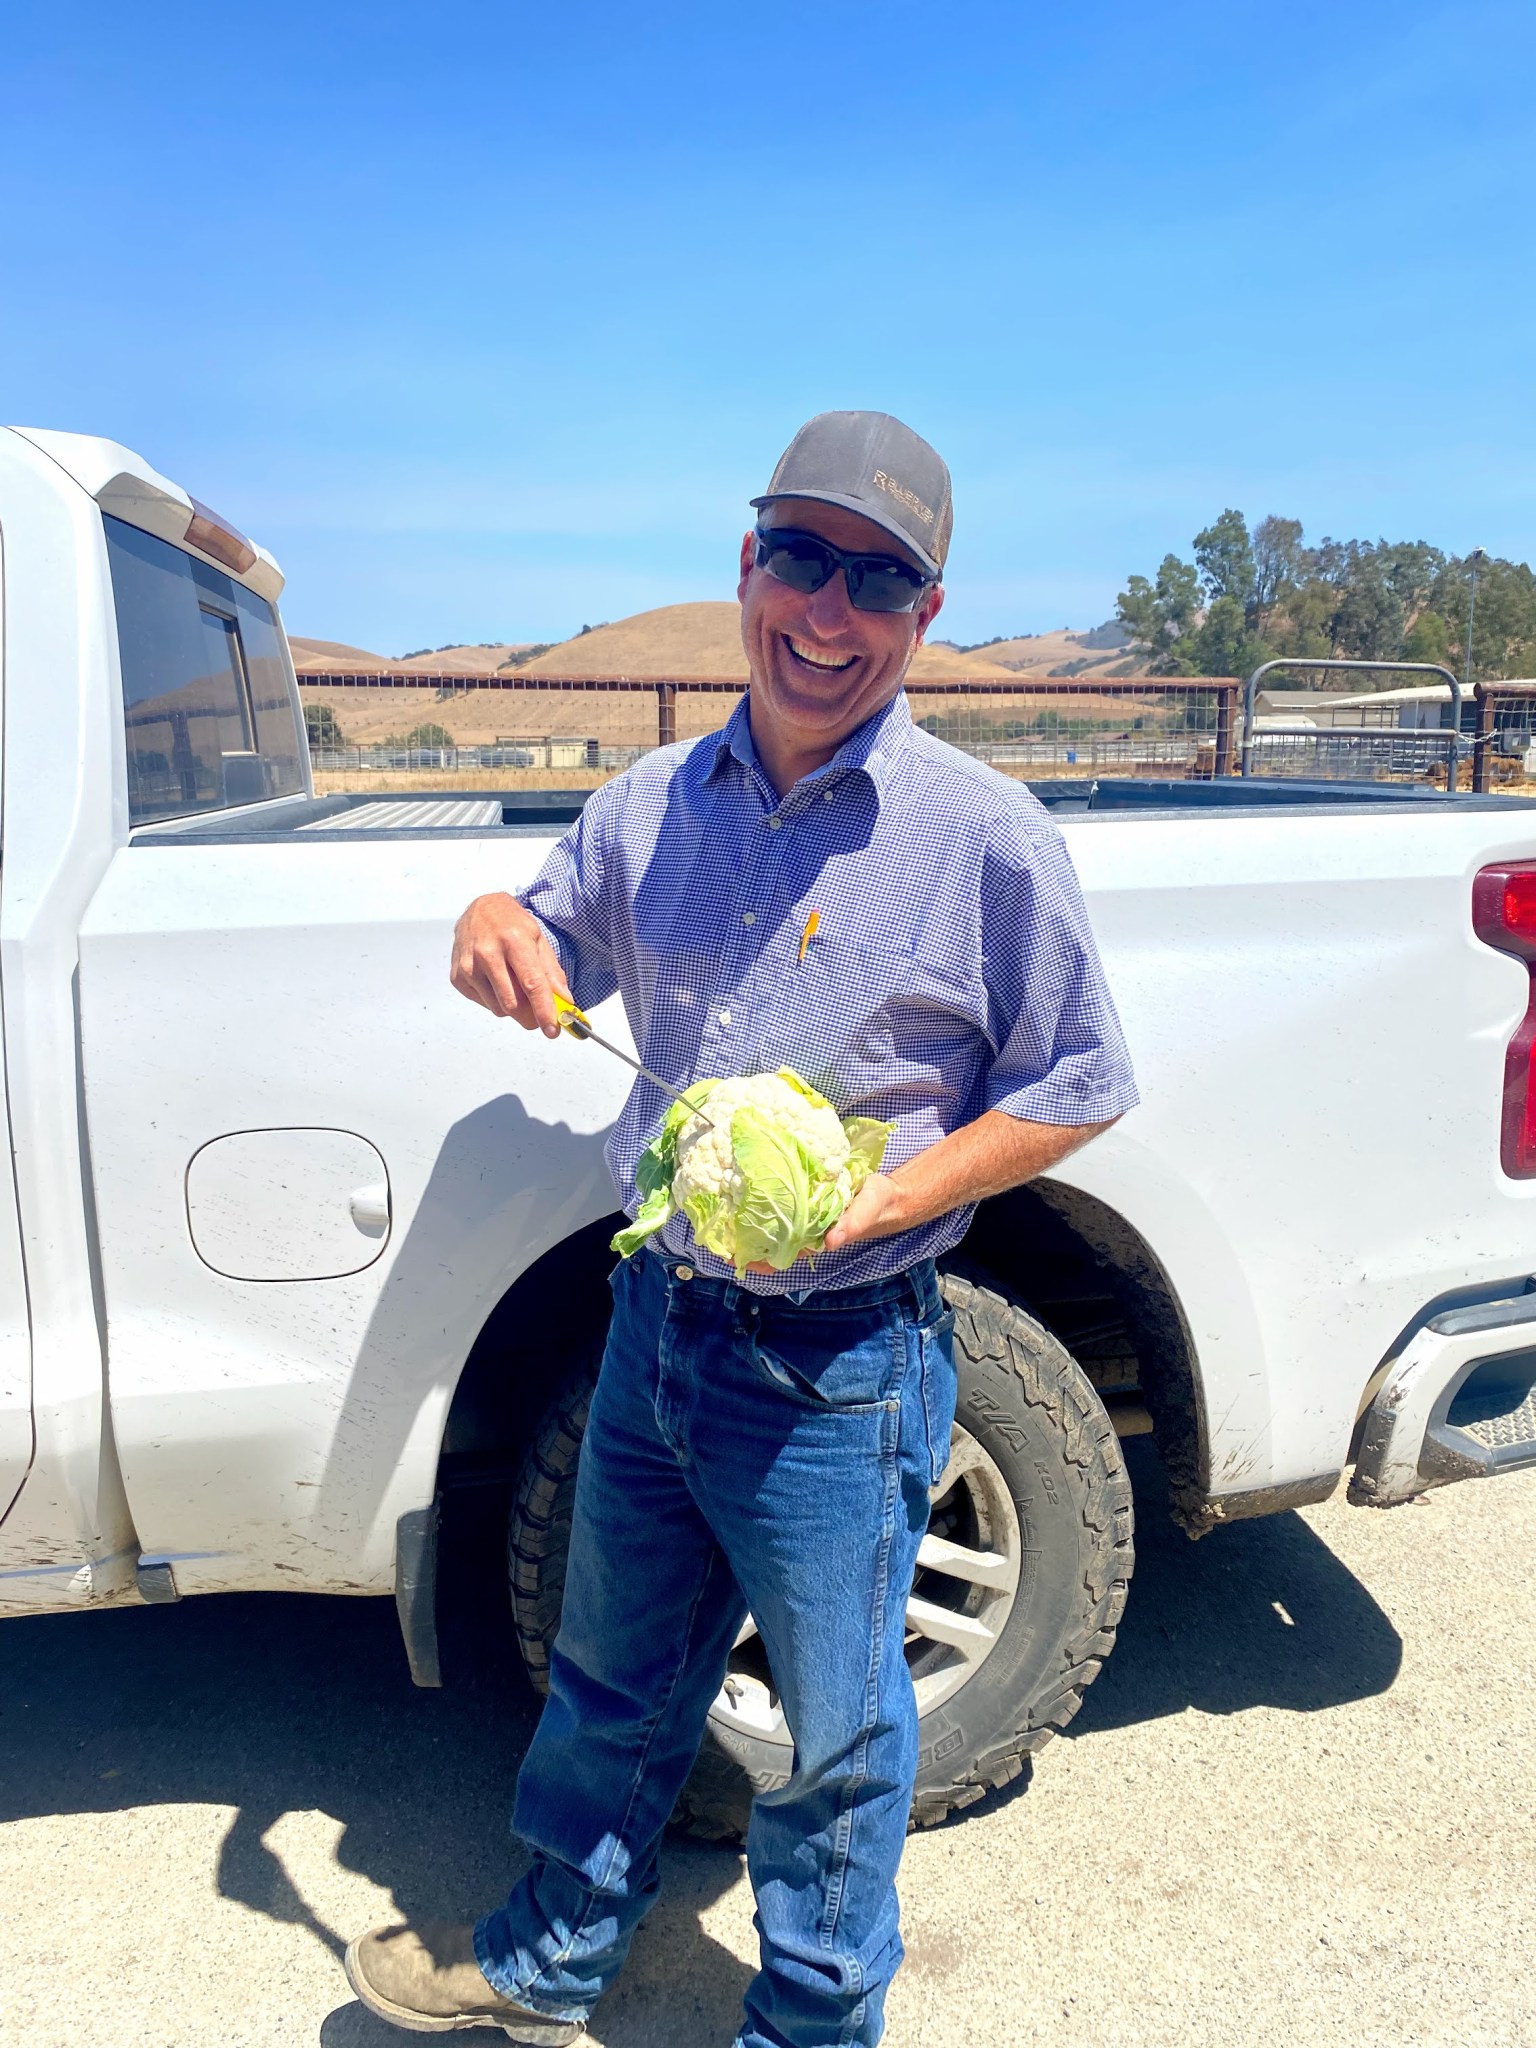 Farmer Mark Mason stands holding a knife and a head of cauliflower, smiling at the camera.